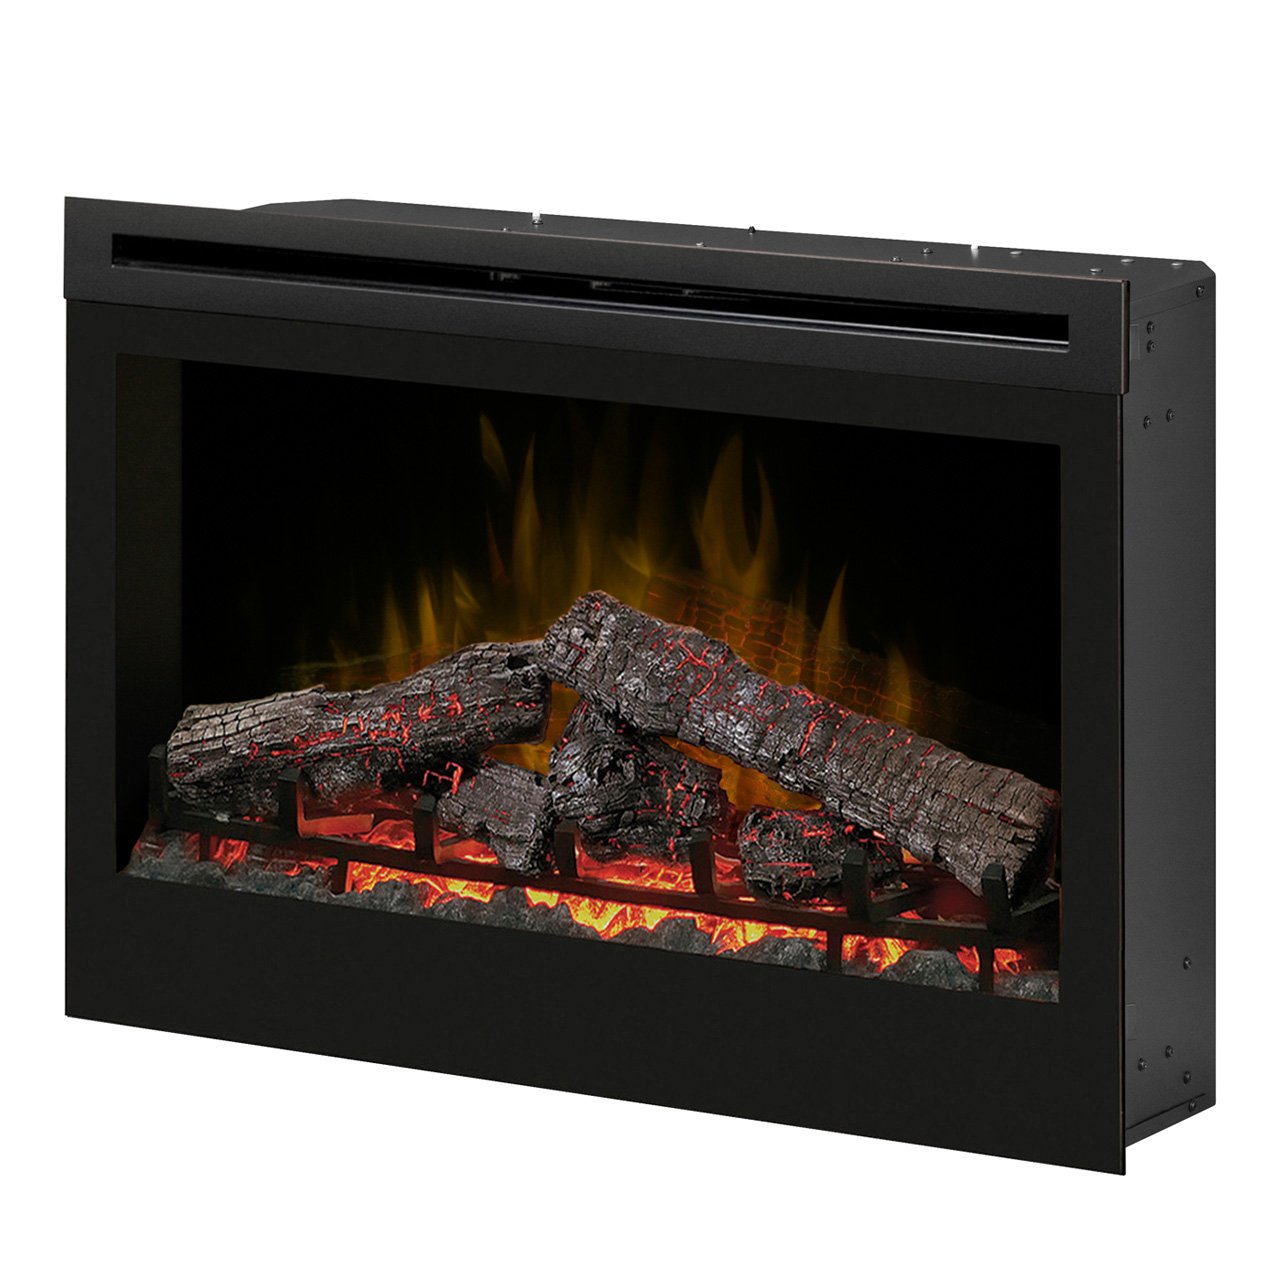 Electric Fireplace Frame New Dimplex Df3033st 33 Inch Self Trimming Electric Fireplace Insert